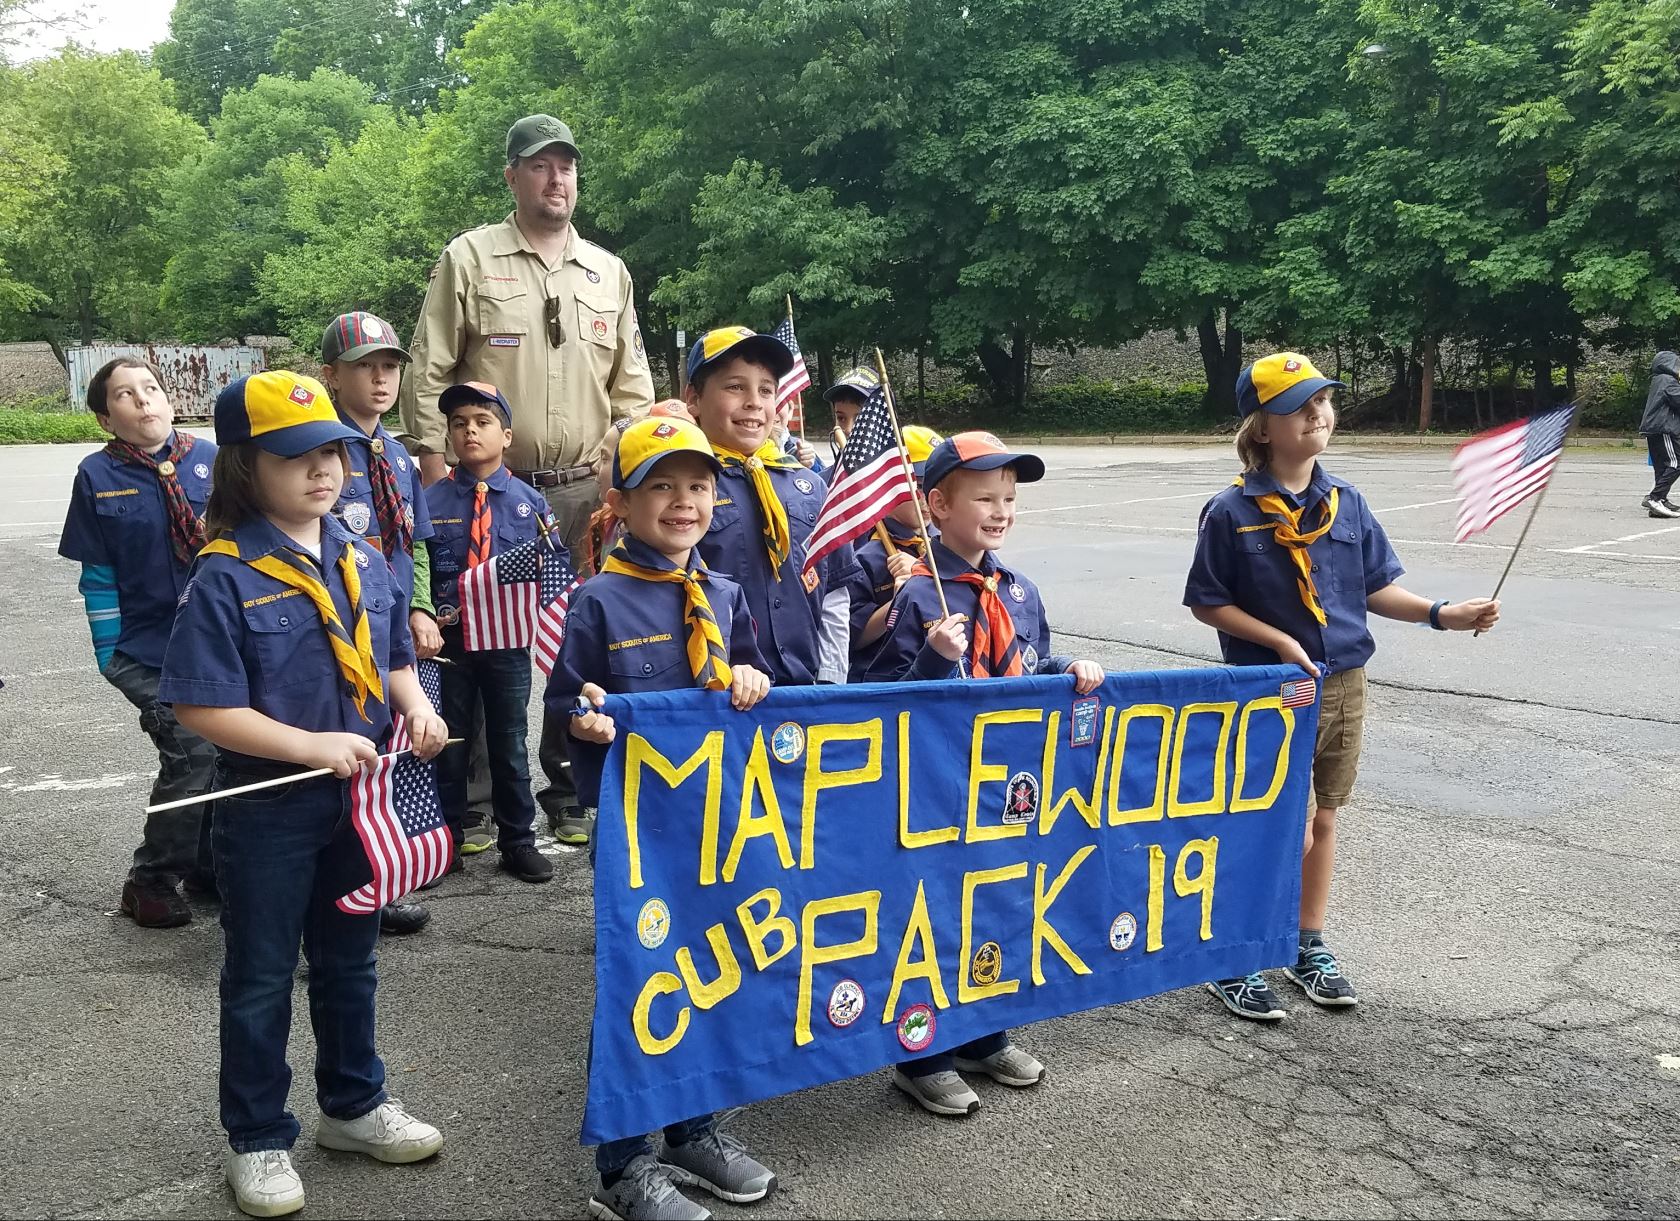 Maplewood Pack 19 Cub Scouts to Provide Safe Outdoor Activities - The